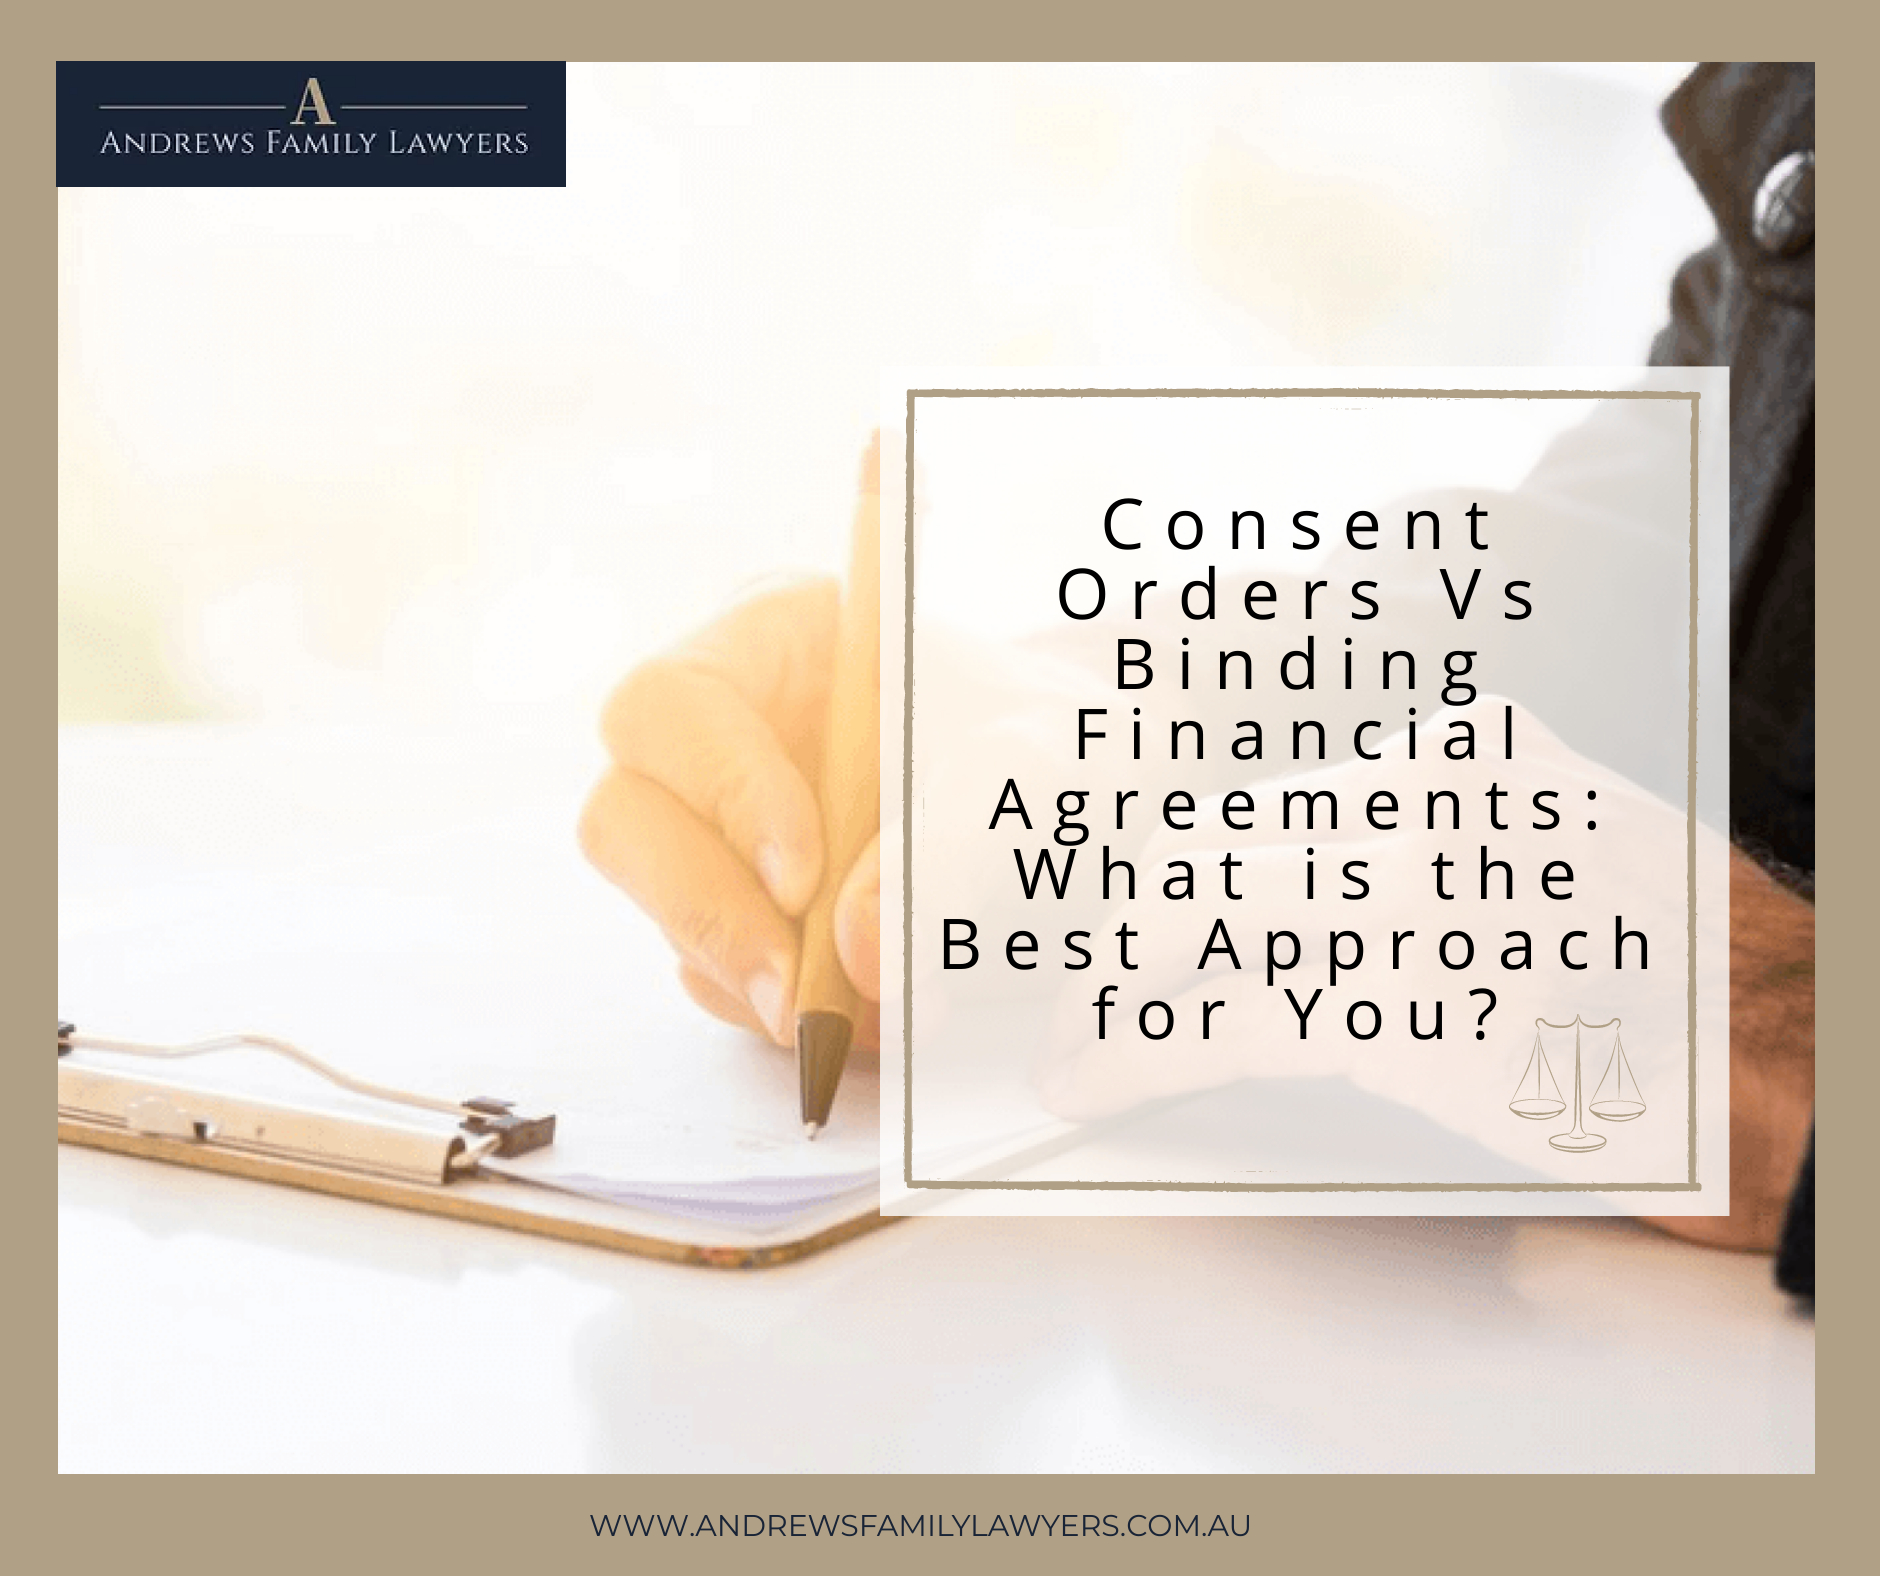 Consent Orders Vs Binding Financial Agreements: What is the Best Approach for You?